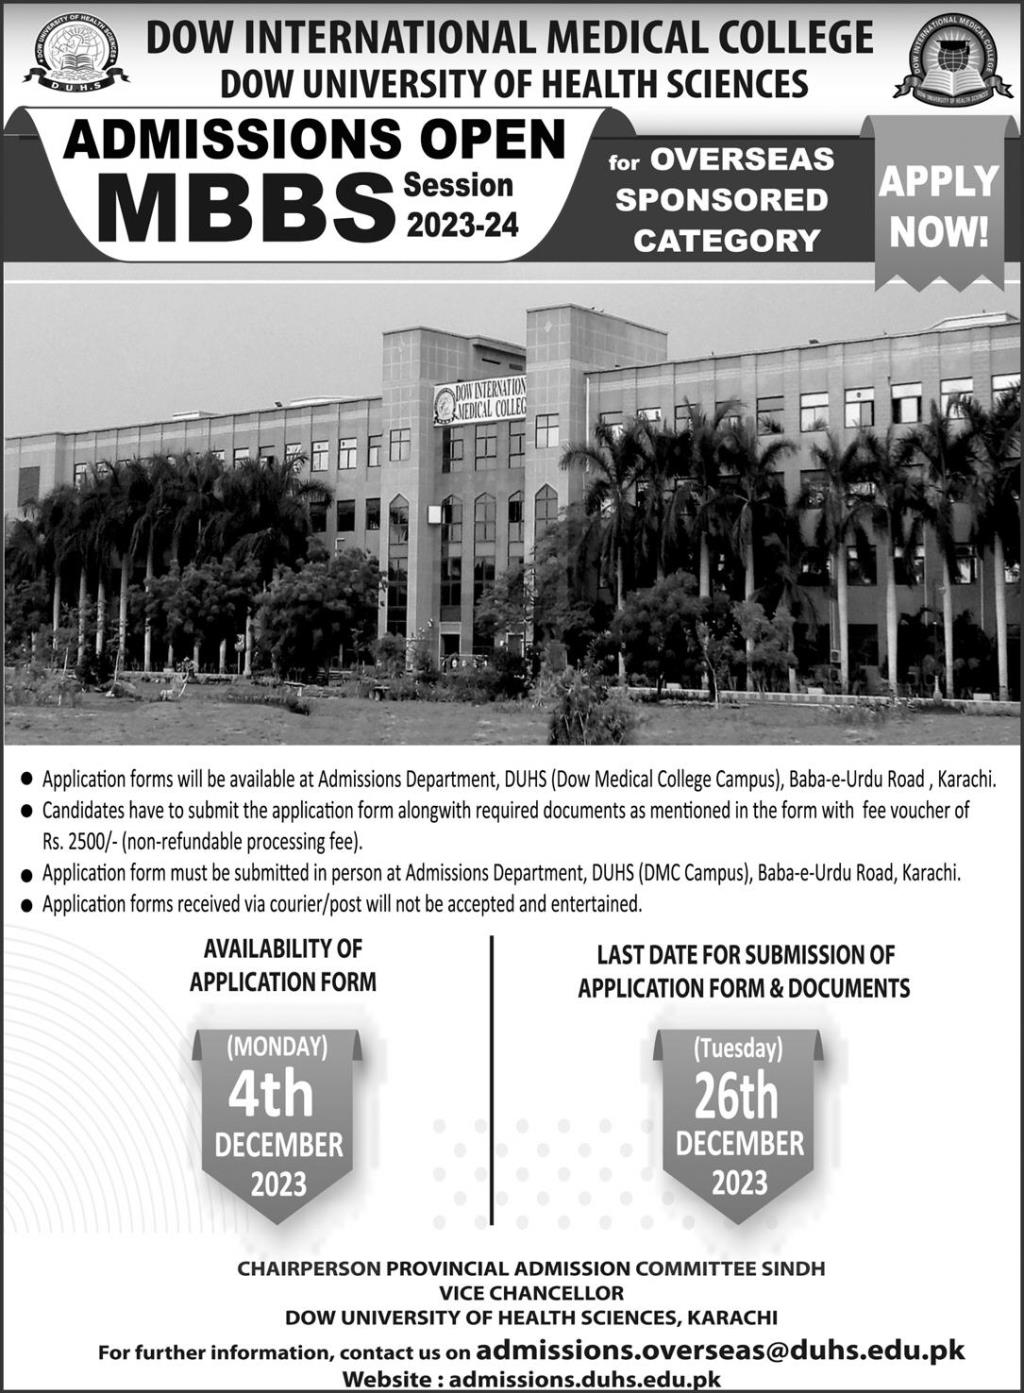 DUHS DOW International Medical College Admissions Open MBBS 2023-2024 For Overseas Sponsored Category